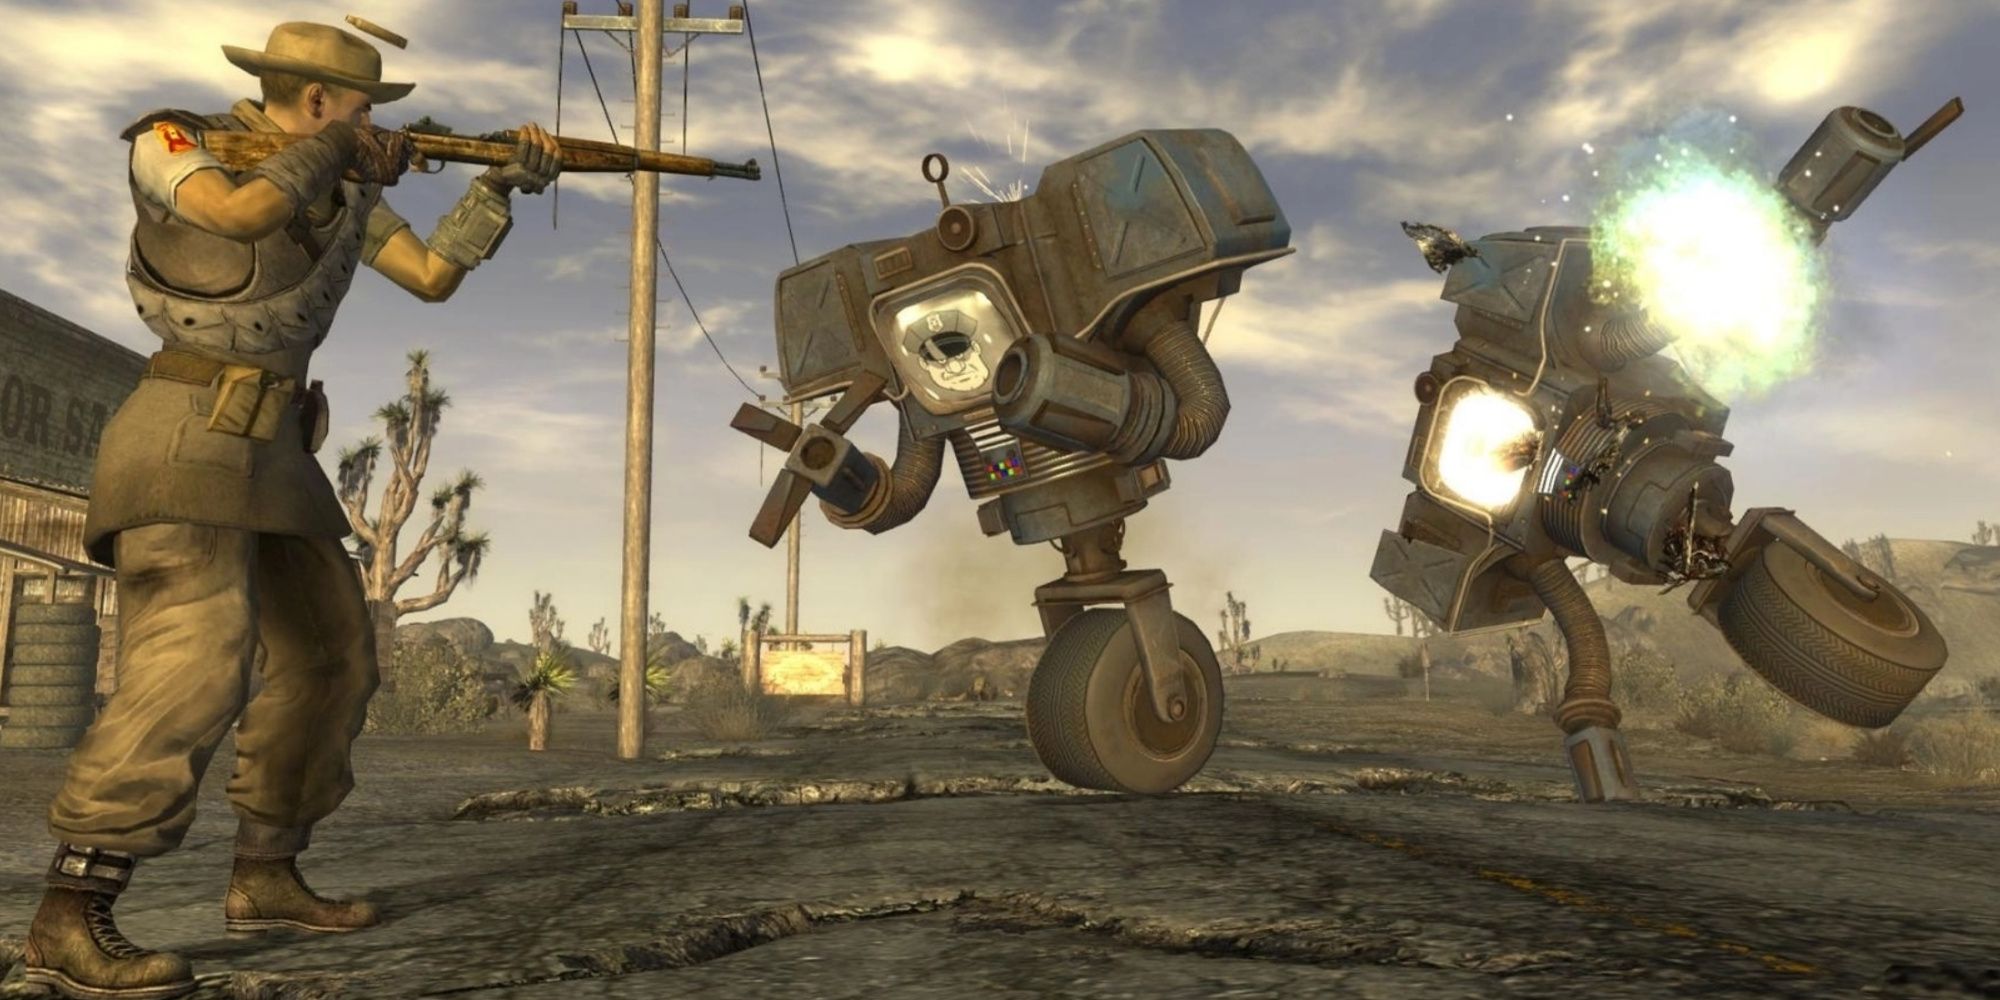 Fighting enemies in Fallout New Vegas